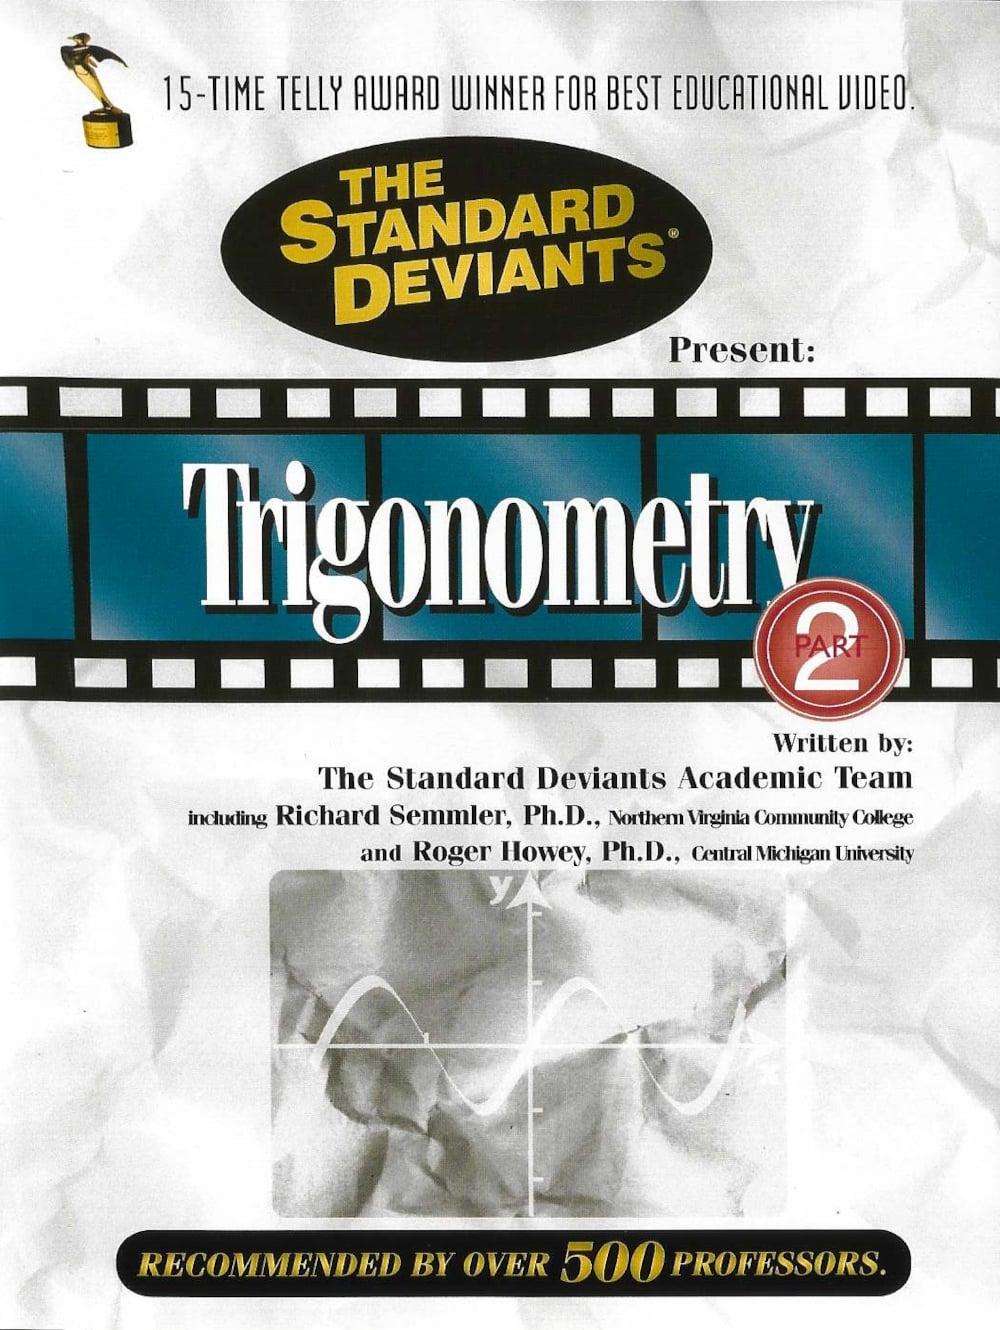 The Standard Deviants: The Twisted World of Trigonometry, Part 2 poster